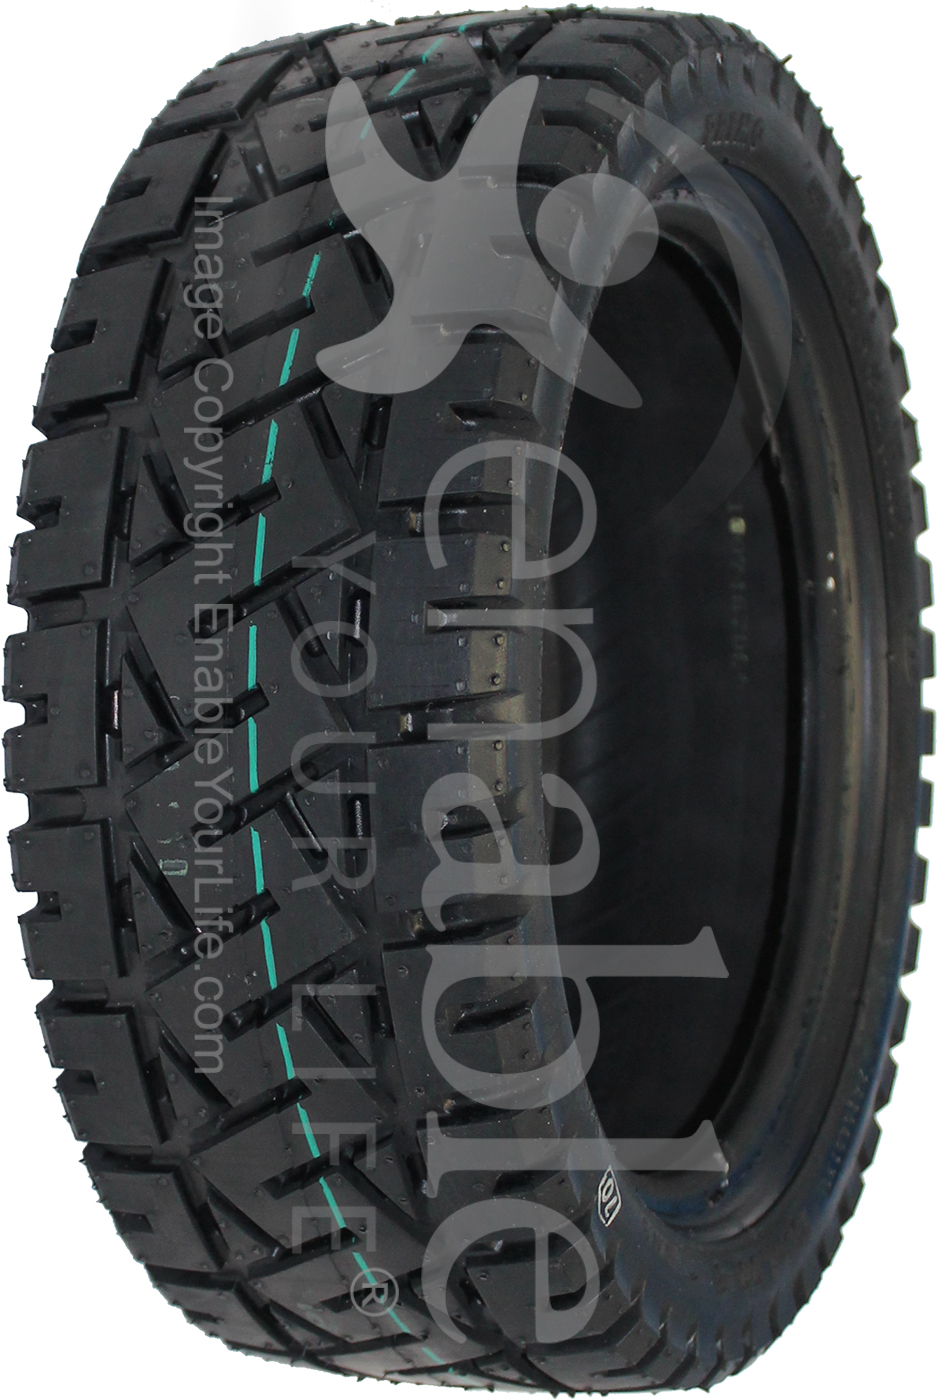 13 x 4.00-8 Primo Low Profile Pneumatic Scooter Tire - Angled View Shown